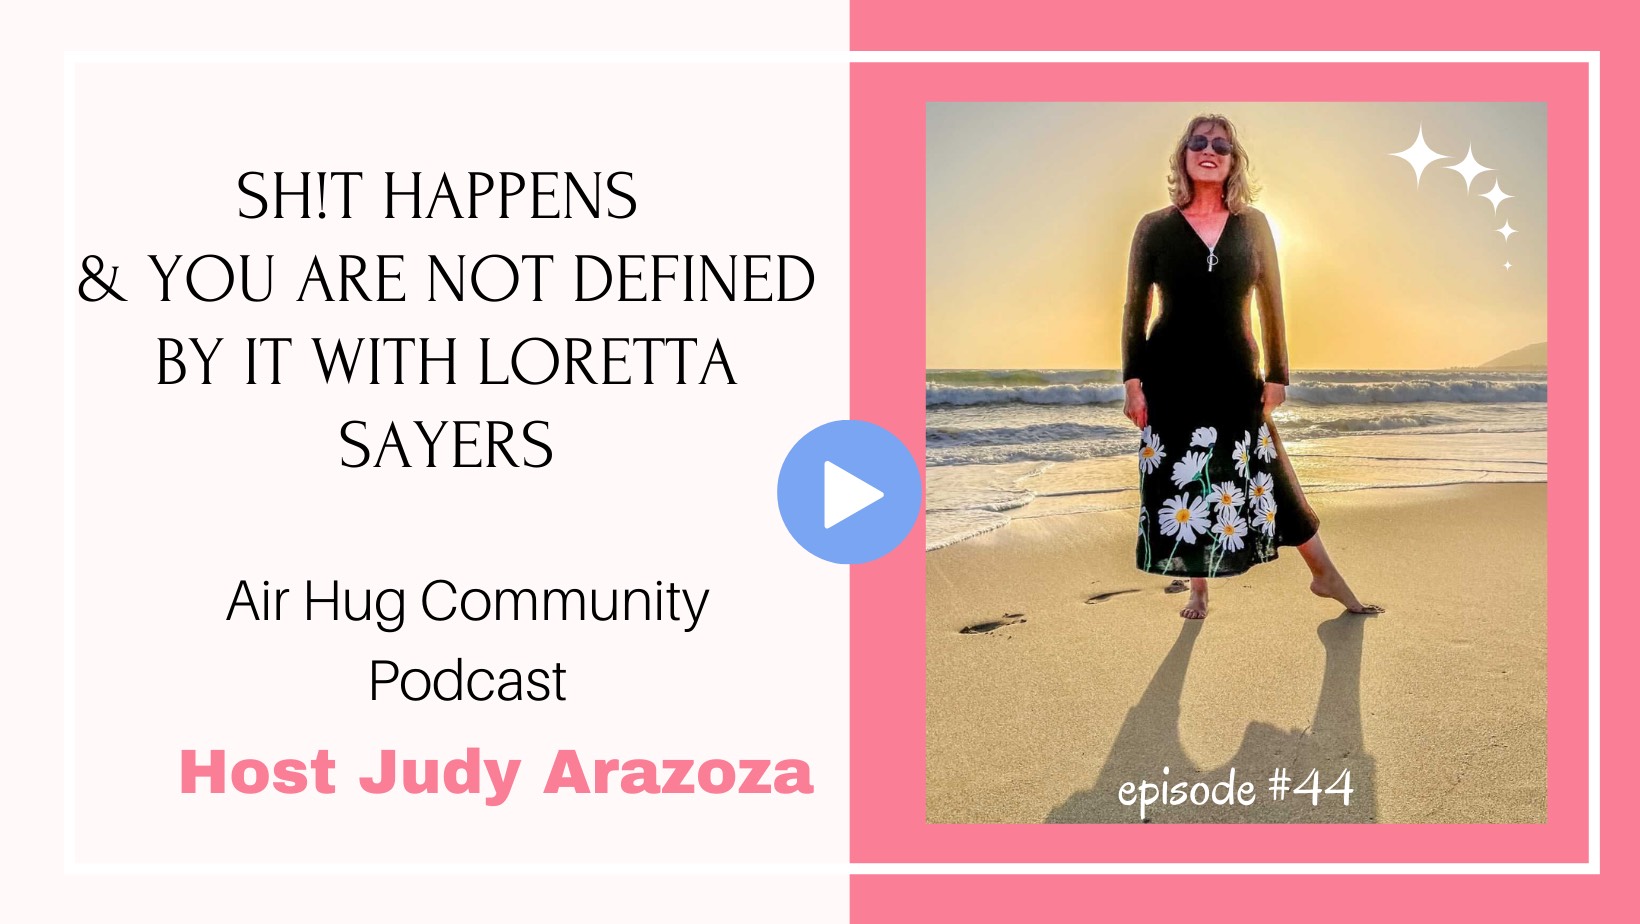 Featured image for “Episode 44: Sh!t Happens & You are not Defined by It with Loretta Sayers”